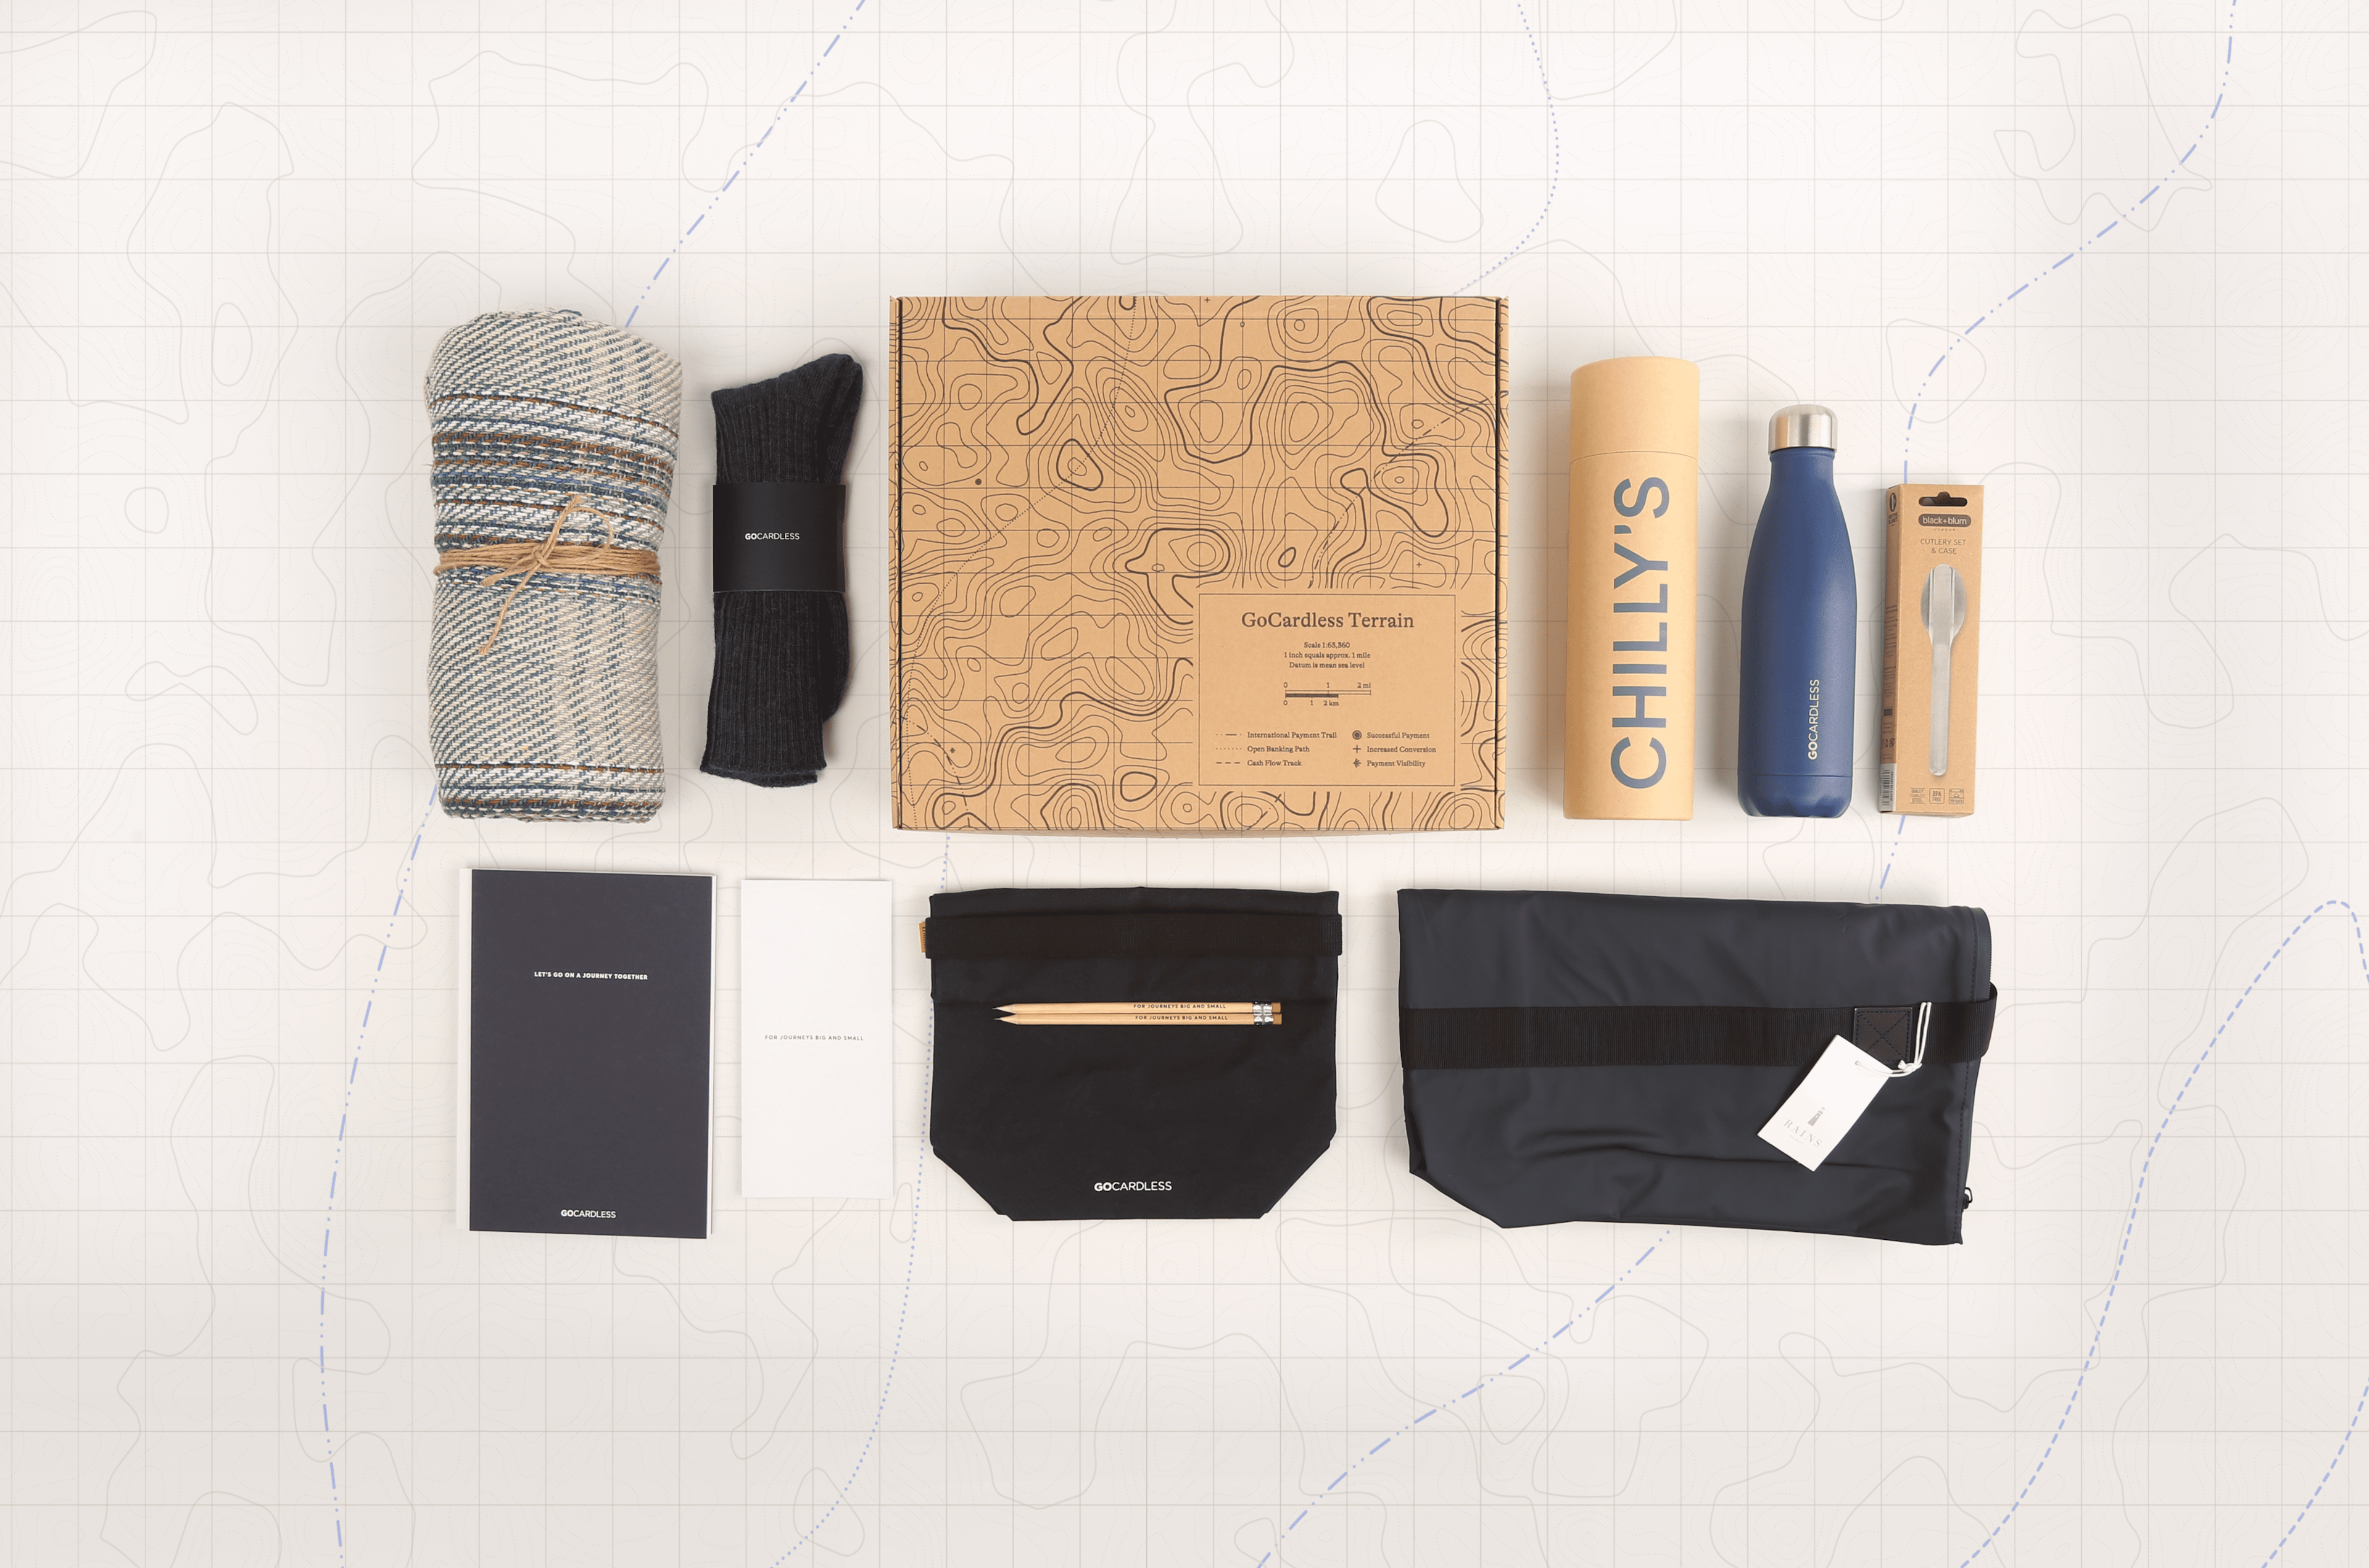 Photograph of pack items laid out with the pack box